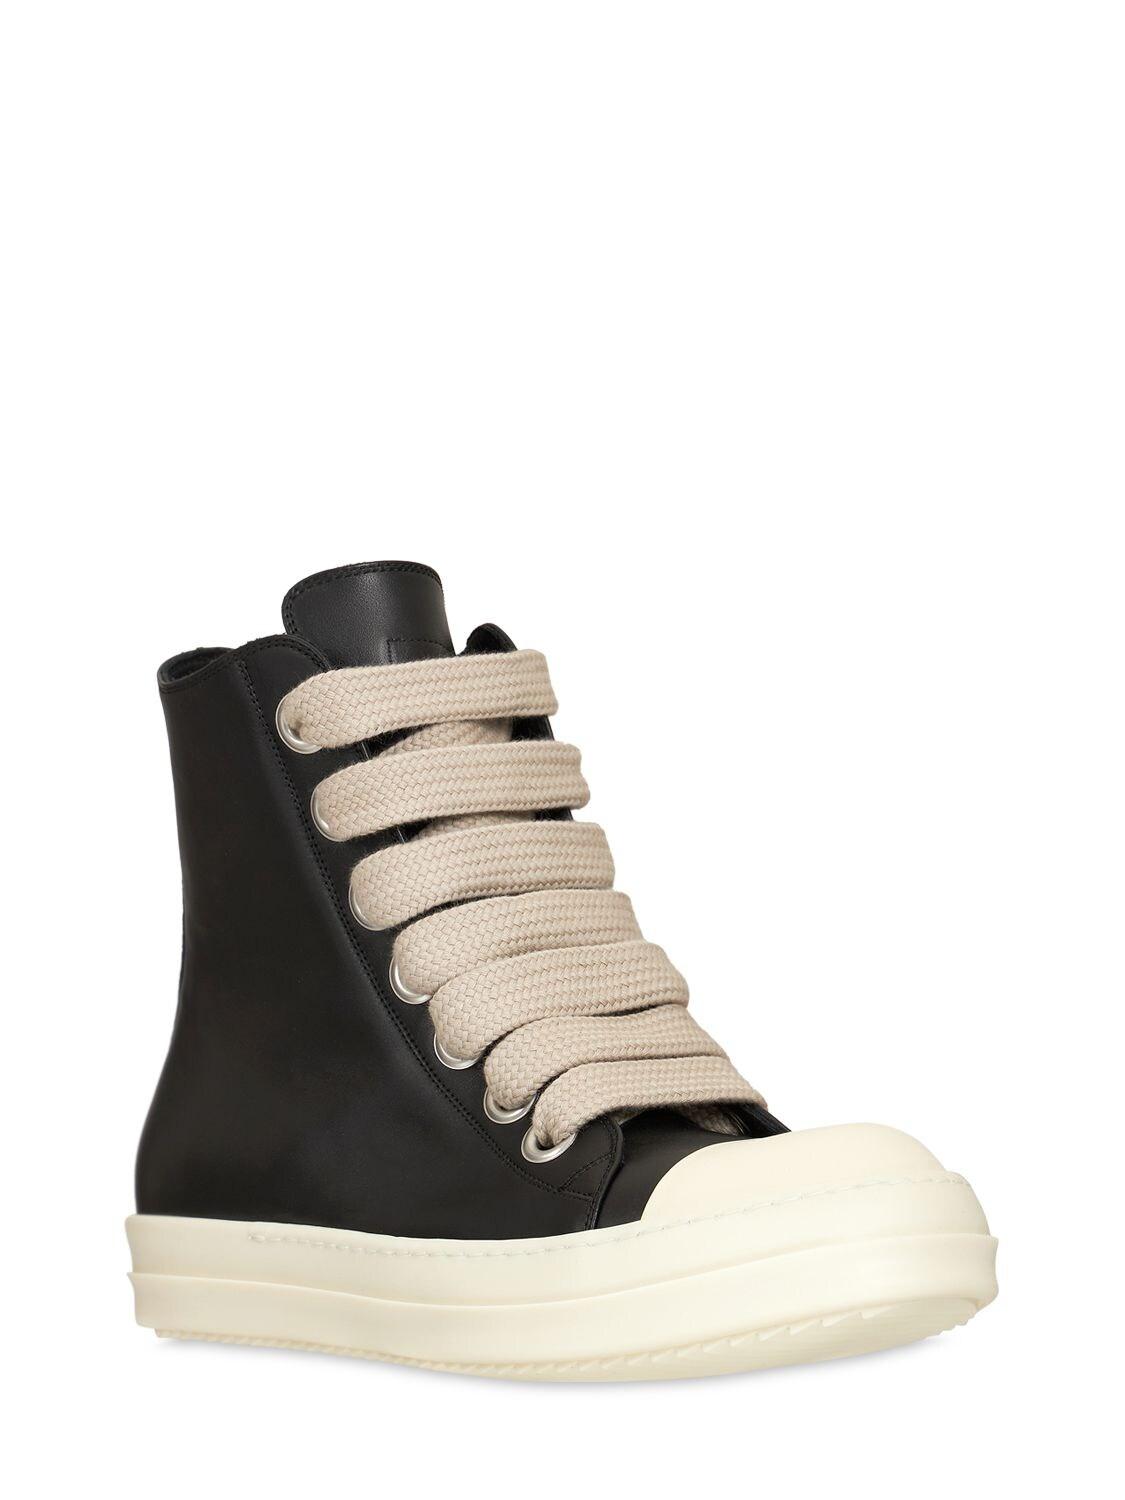 Rick Owens Jumbo Laces High Top Leather Sneakers in Black for Men | Lyst